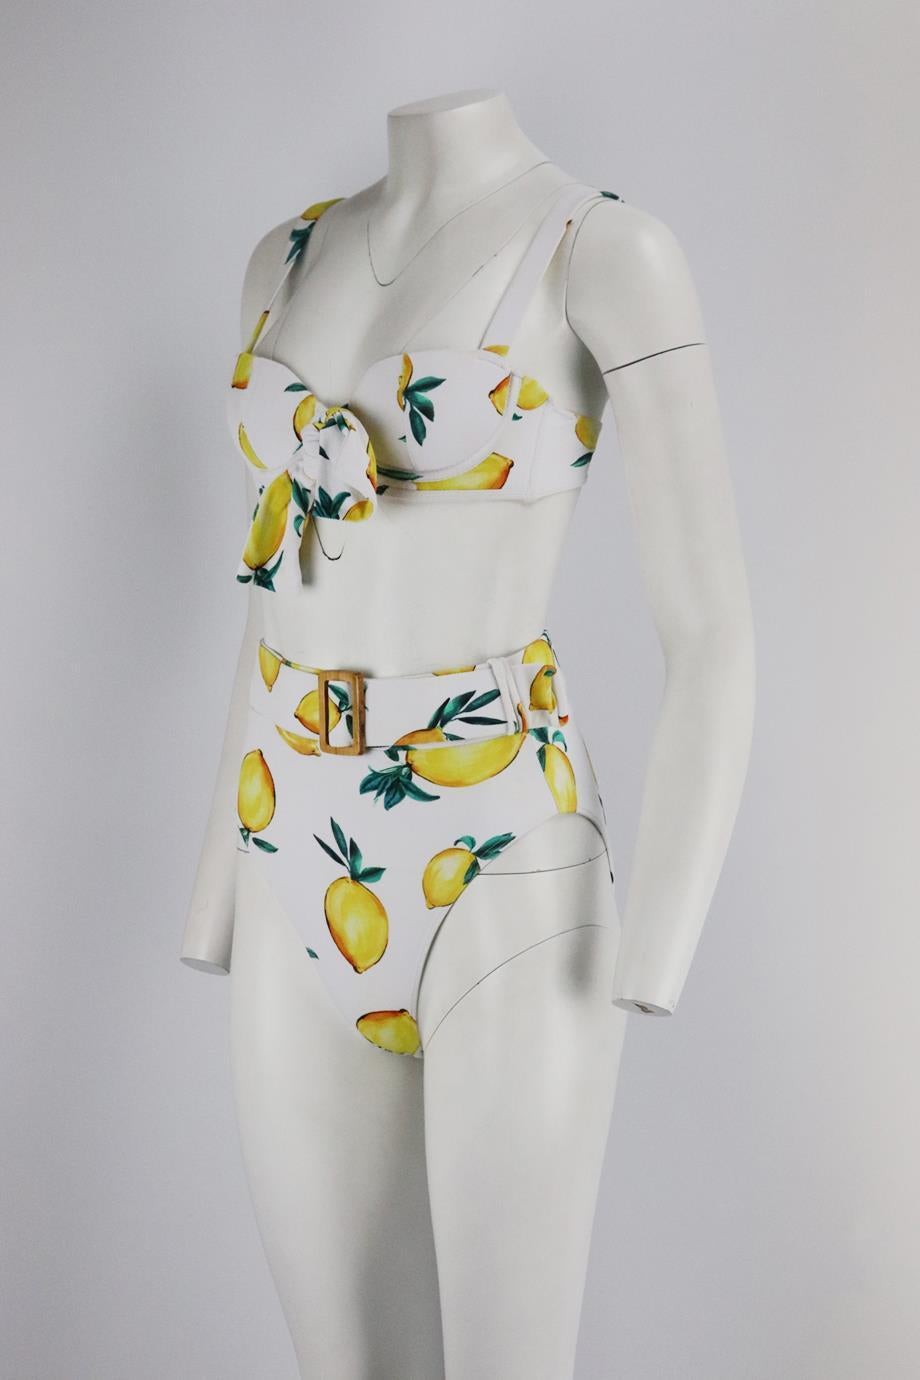 Alexandra Miro printed stretch bikini. Made from yellow and white lemon-printed polyamide-blend in a high-rise silhouette. Yellow and white. Hook fastening at back. 82% Polyamide, 18% elastane. Size: Small (UK 8, US 4, FR 36, IT 40)